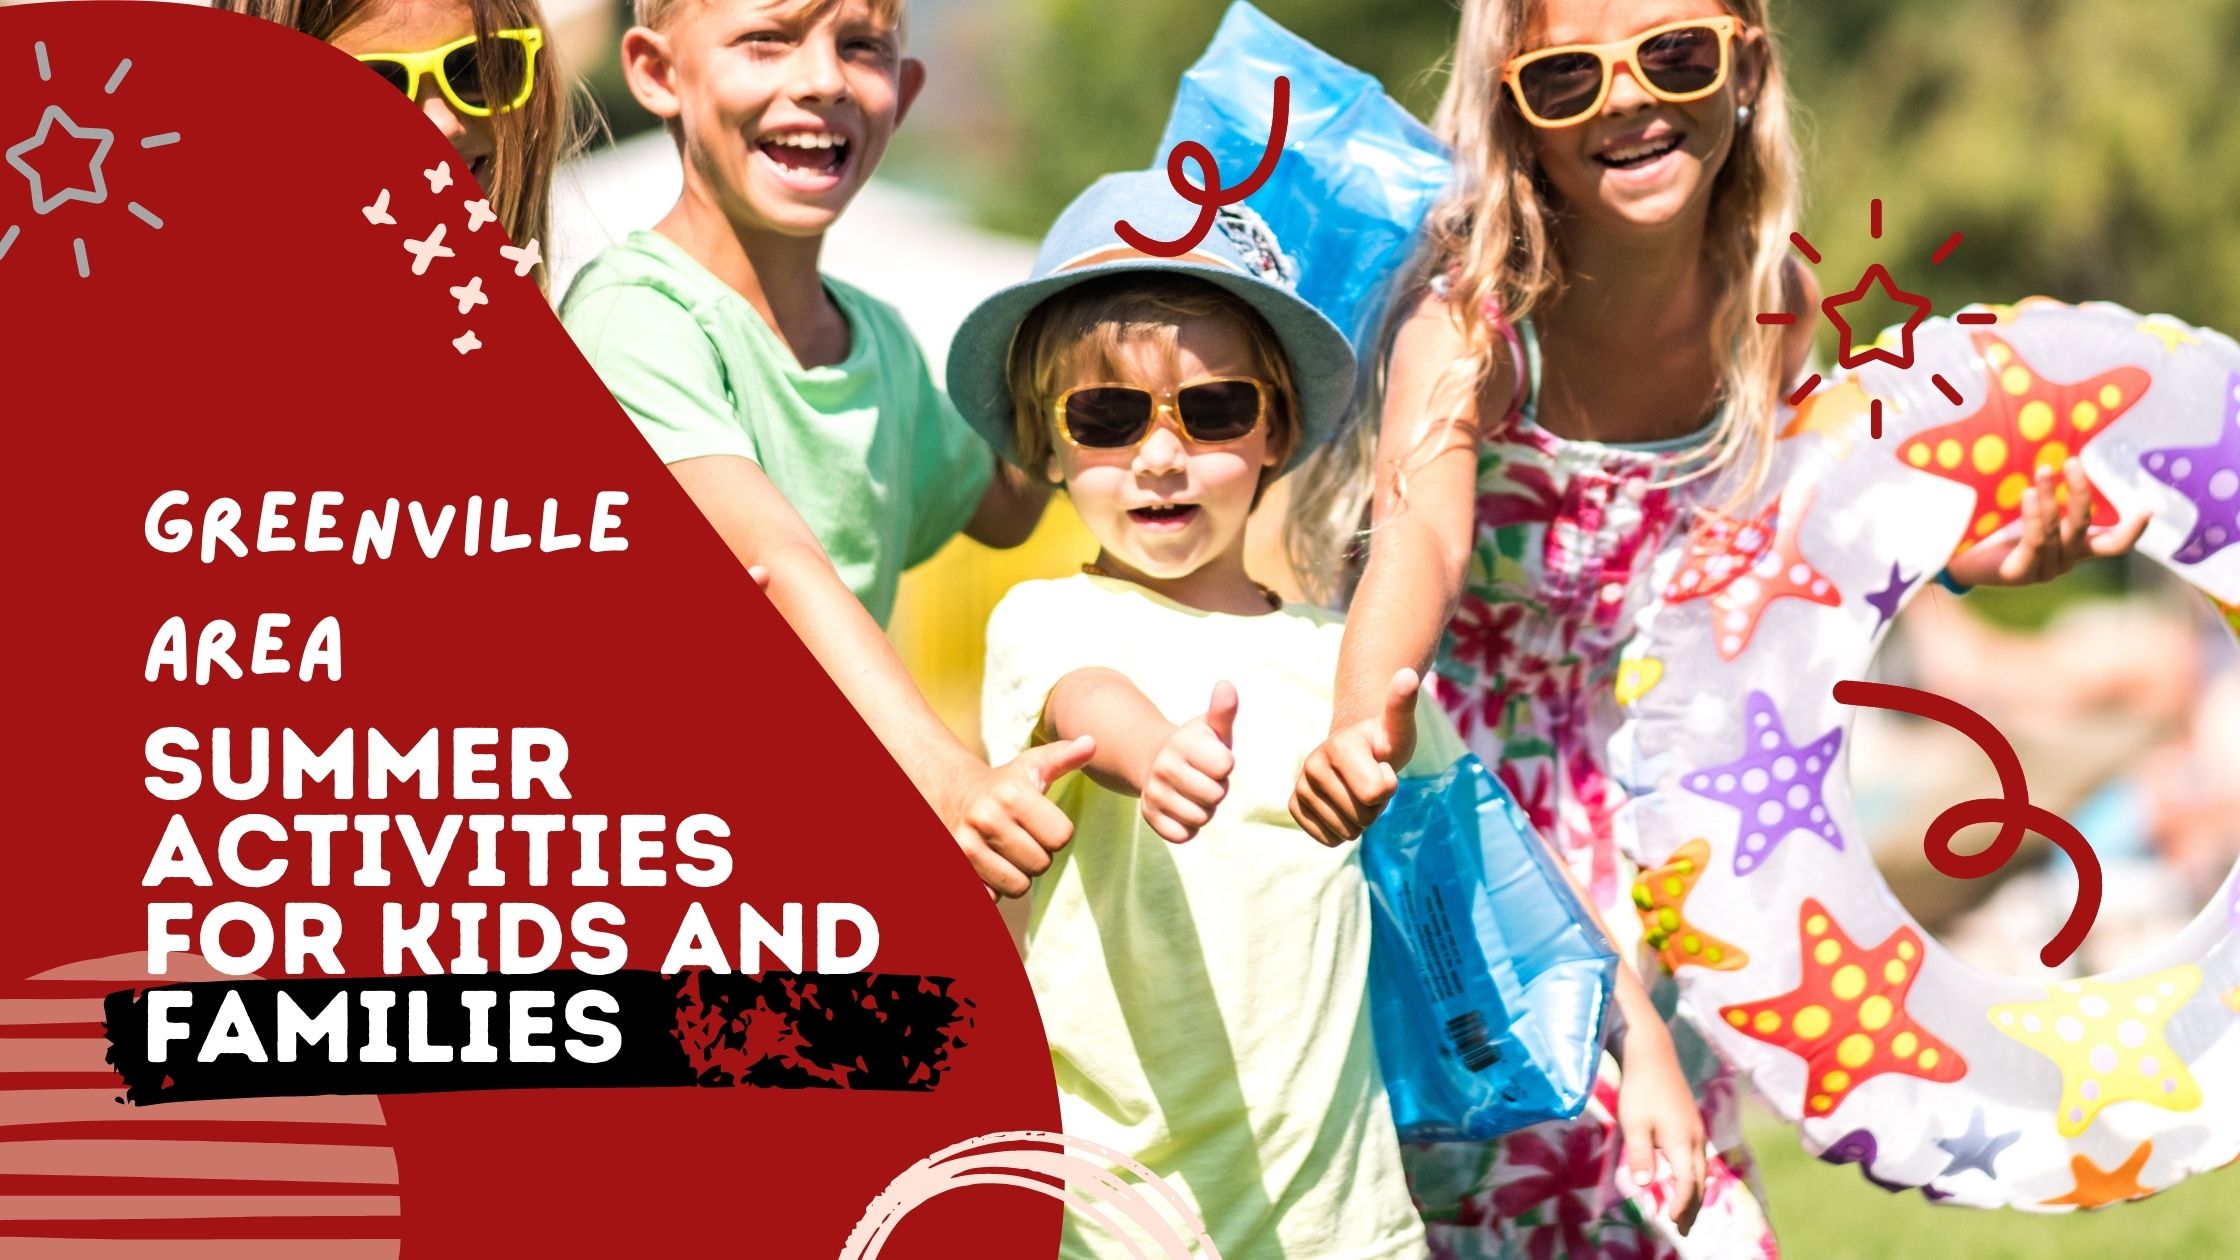 Summer Activities for Kids and Families in the Greenville, SC Area